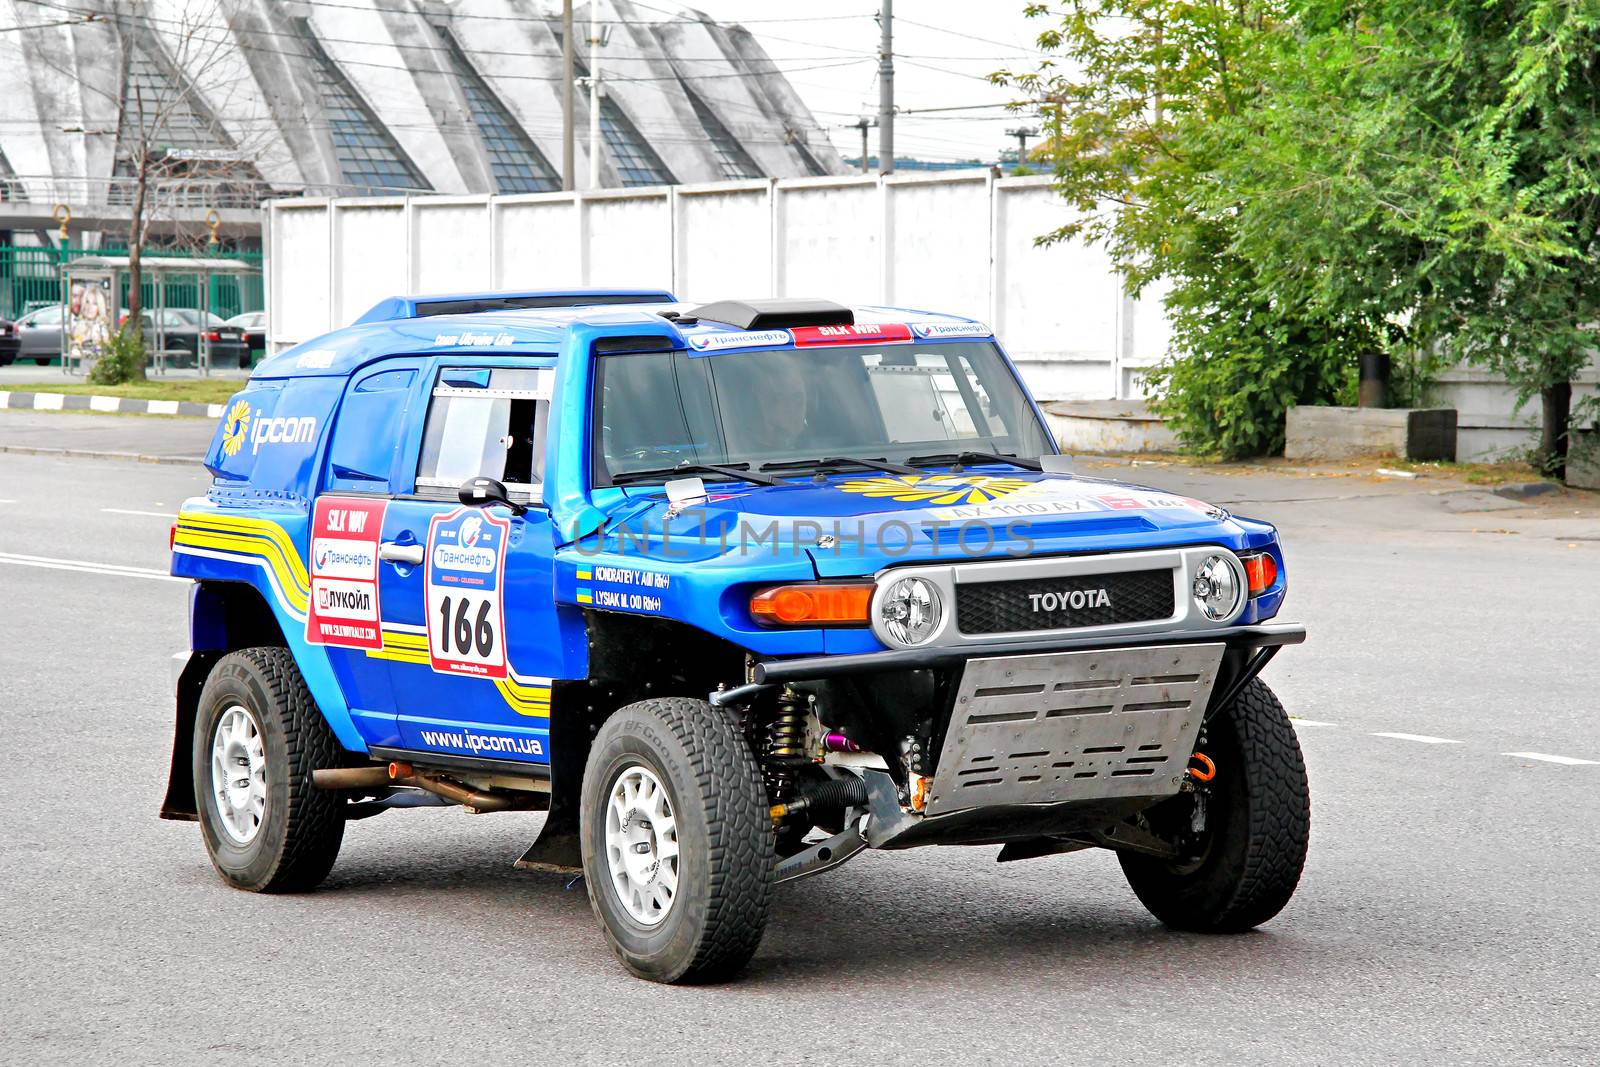 MOSCOW, RUSSIA - JULY 7: Michail Lisyak's Toyota FJ Cruiser No. 166 of Team Ukraine Line takes part at the annual Silkway Rally - Dakar series on July 7, 2012 in Moscow, Russia.